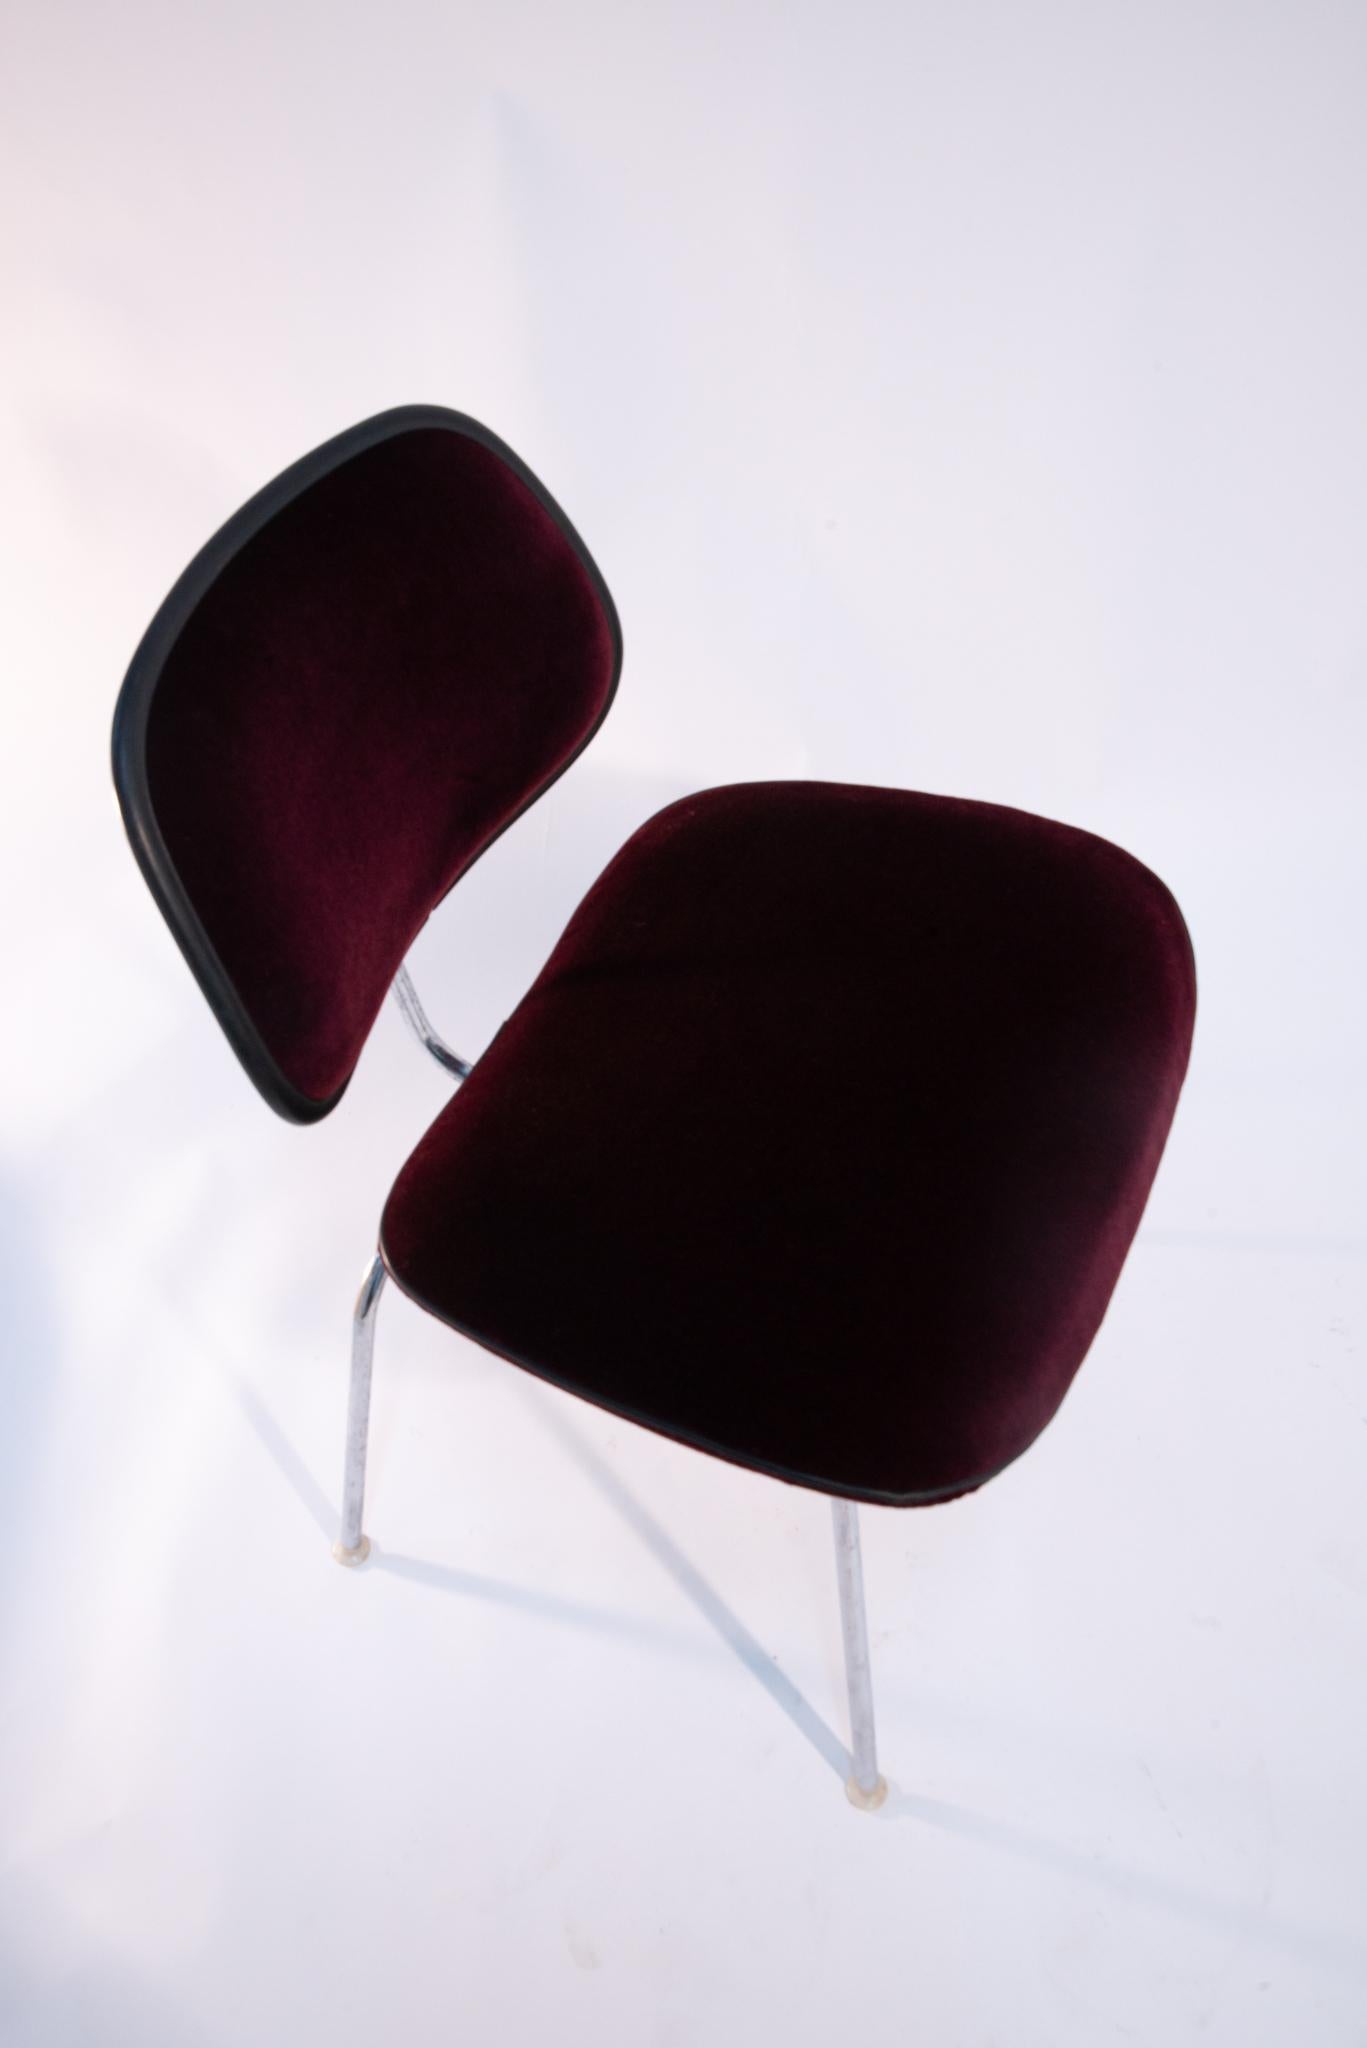 These original EC-127 padded DCM Chairs by Eames for Herman Miller chairs have been given new life by a master upholsterer. Wrapped in a burgundy mohair, and finished with a black leather welt, these iconic dining chairs were developed in 1969 and